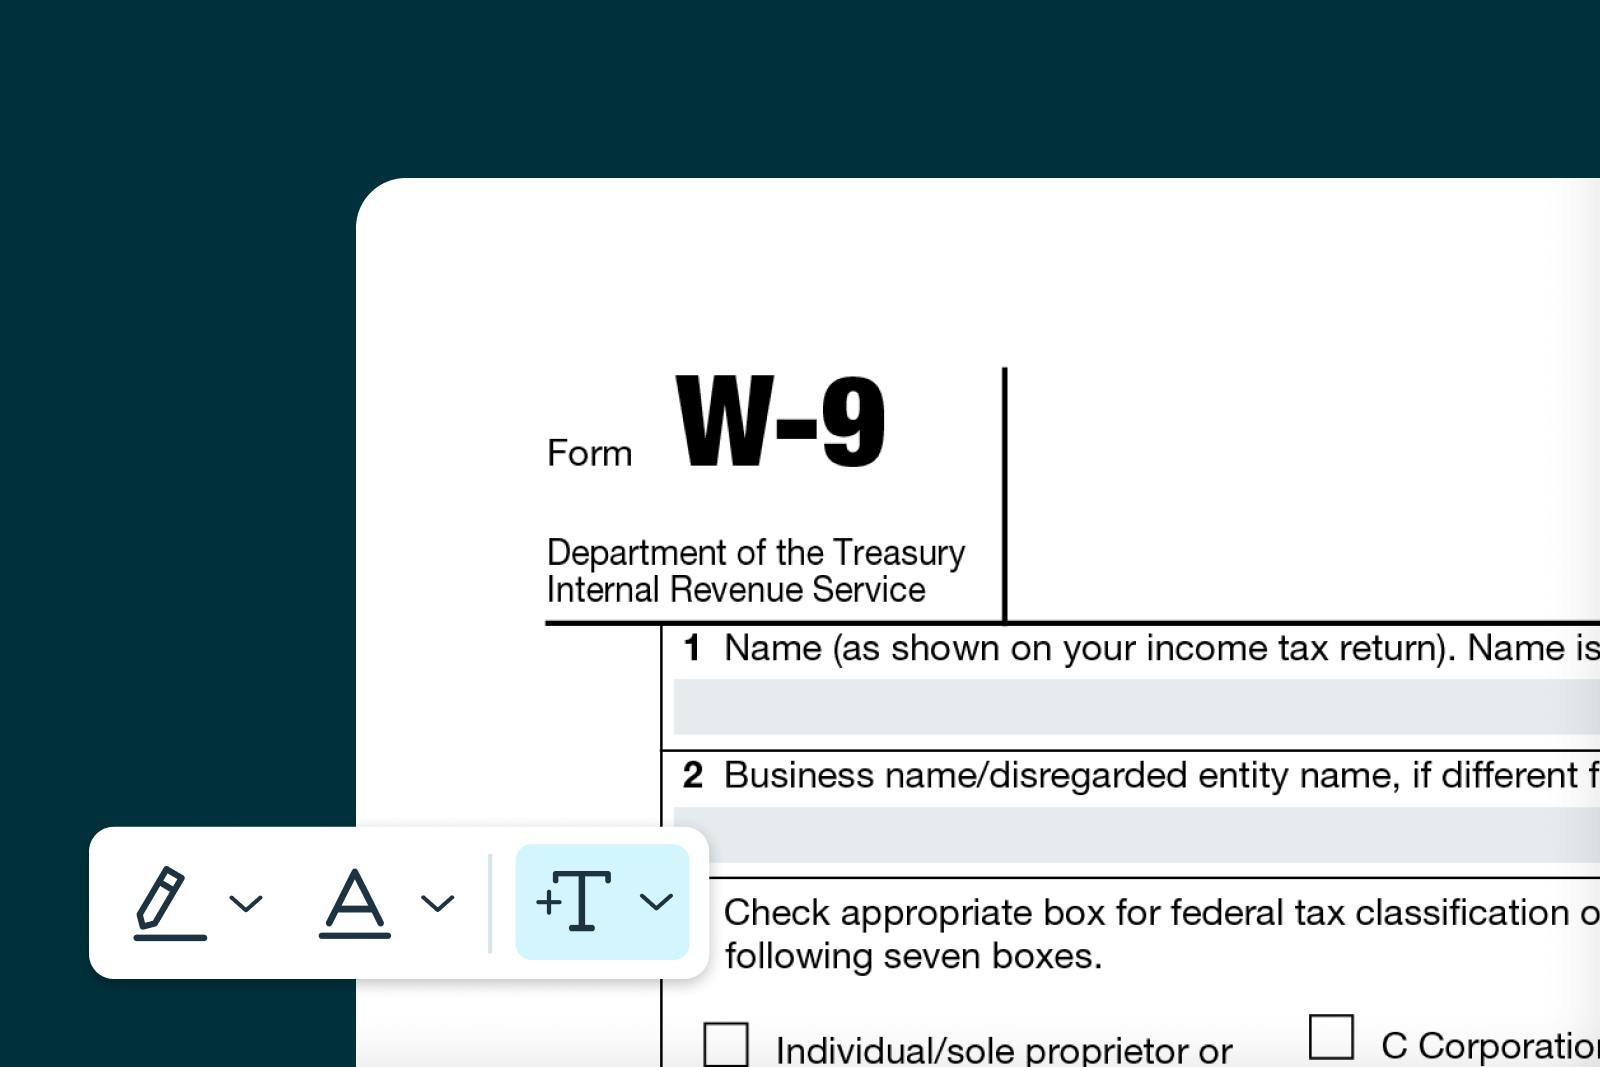 How to fill out a W-9 online